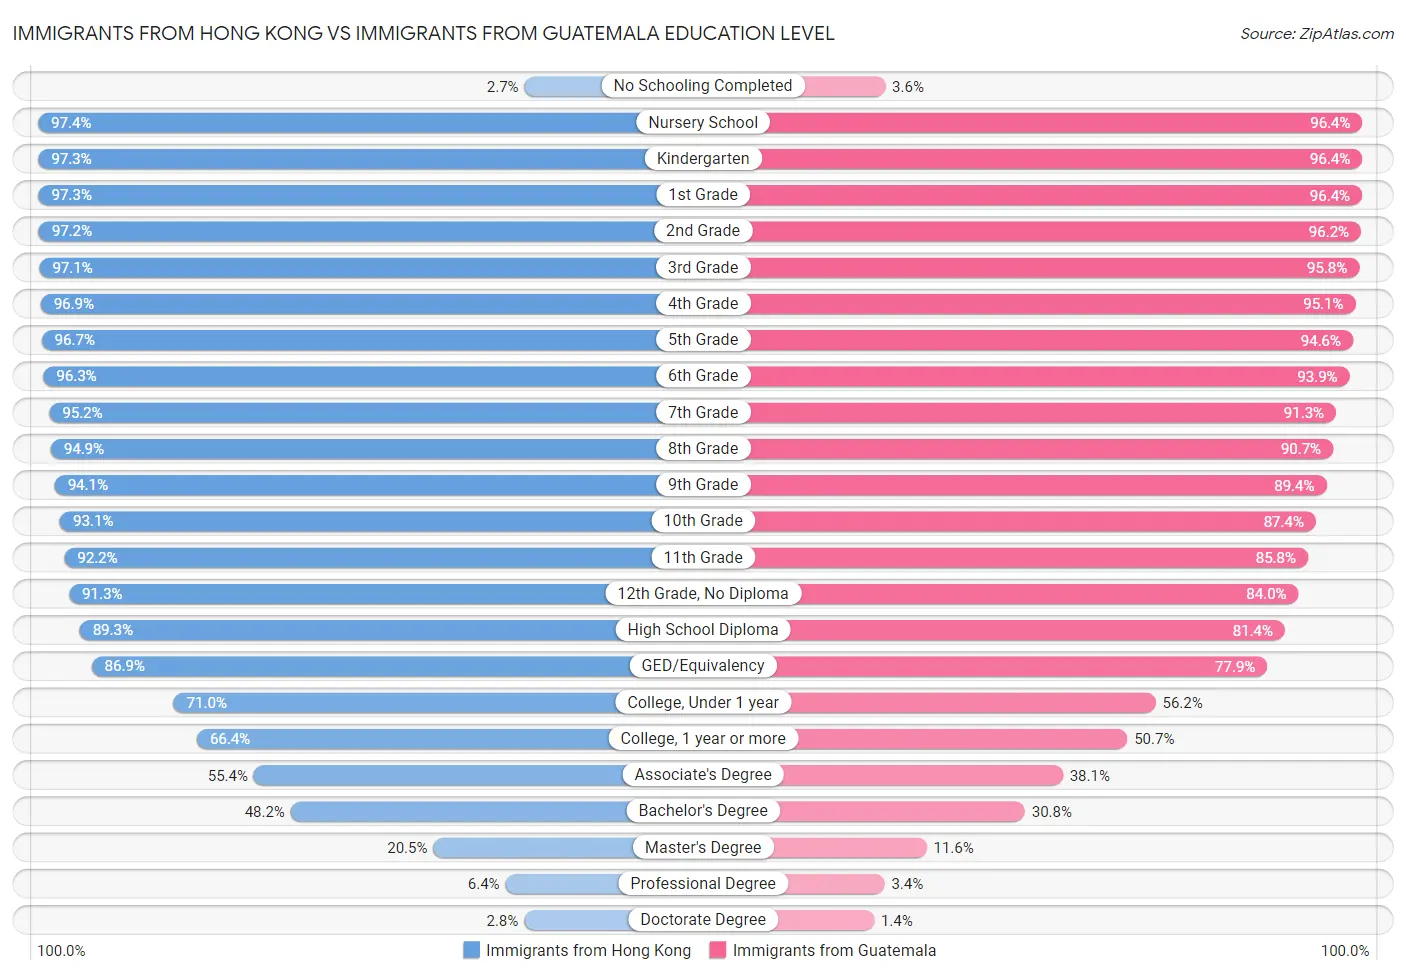 Immigrants from Hong Kong vs Immigrants from Guatemala Education Level